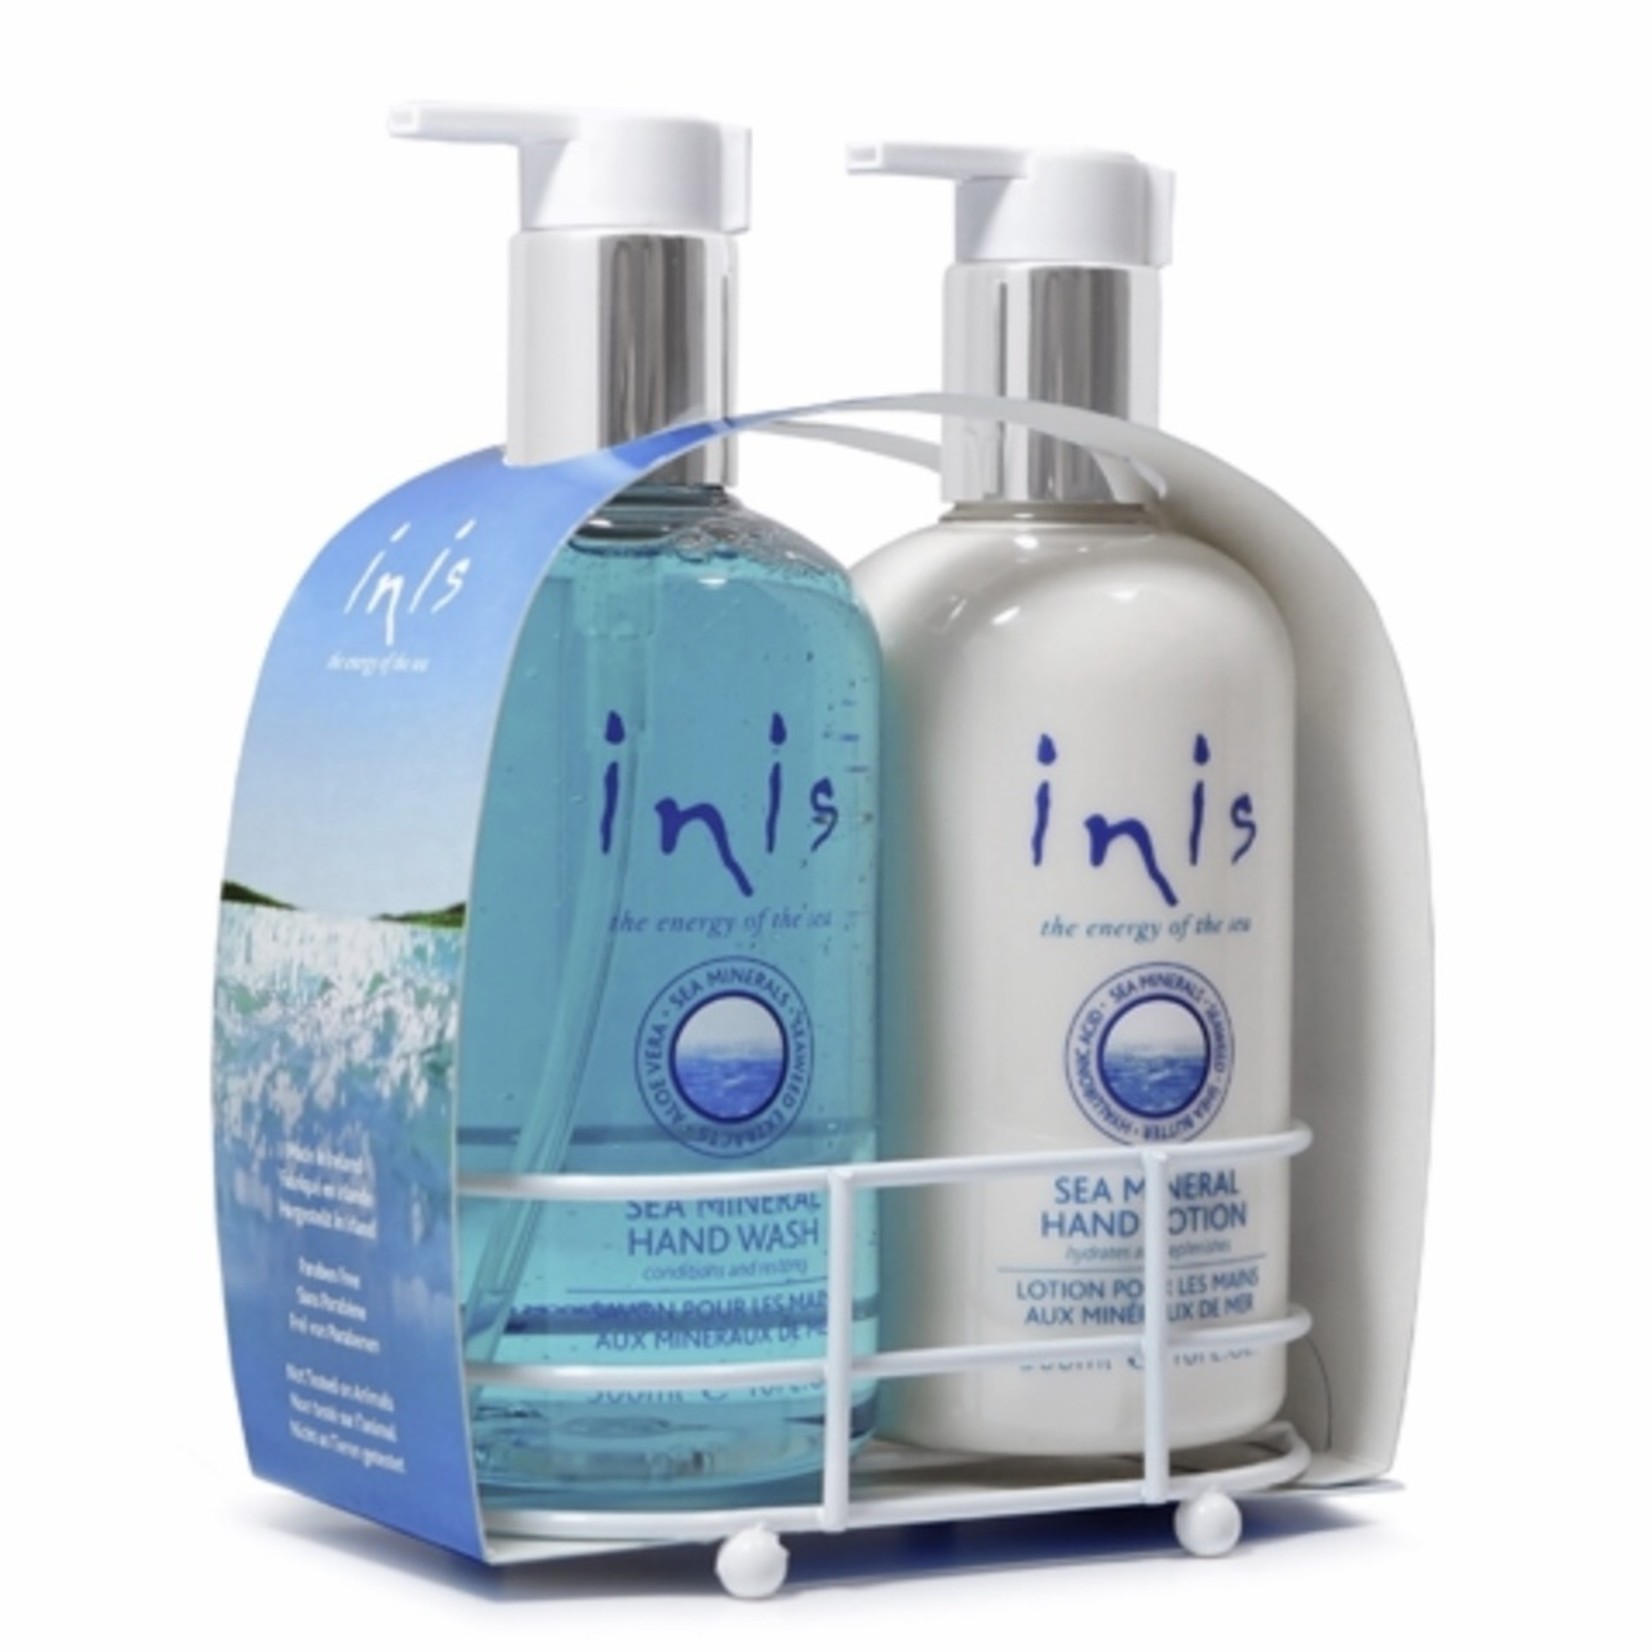 Inis Inis - Hand Care Caddy